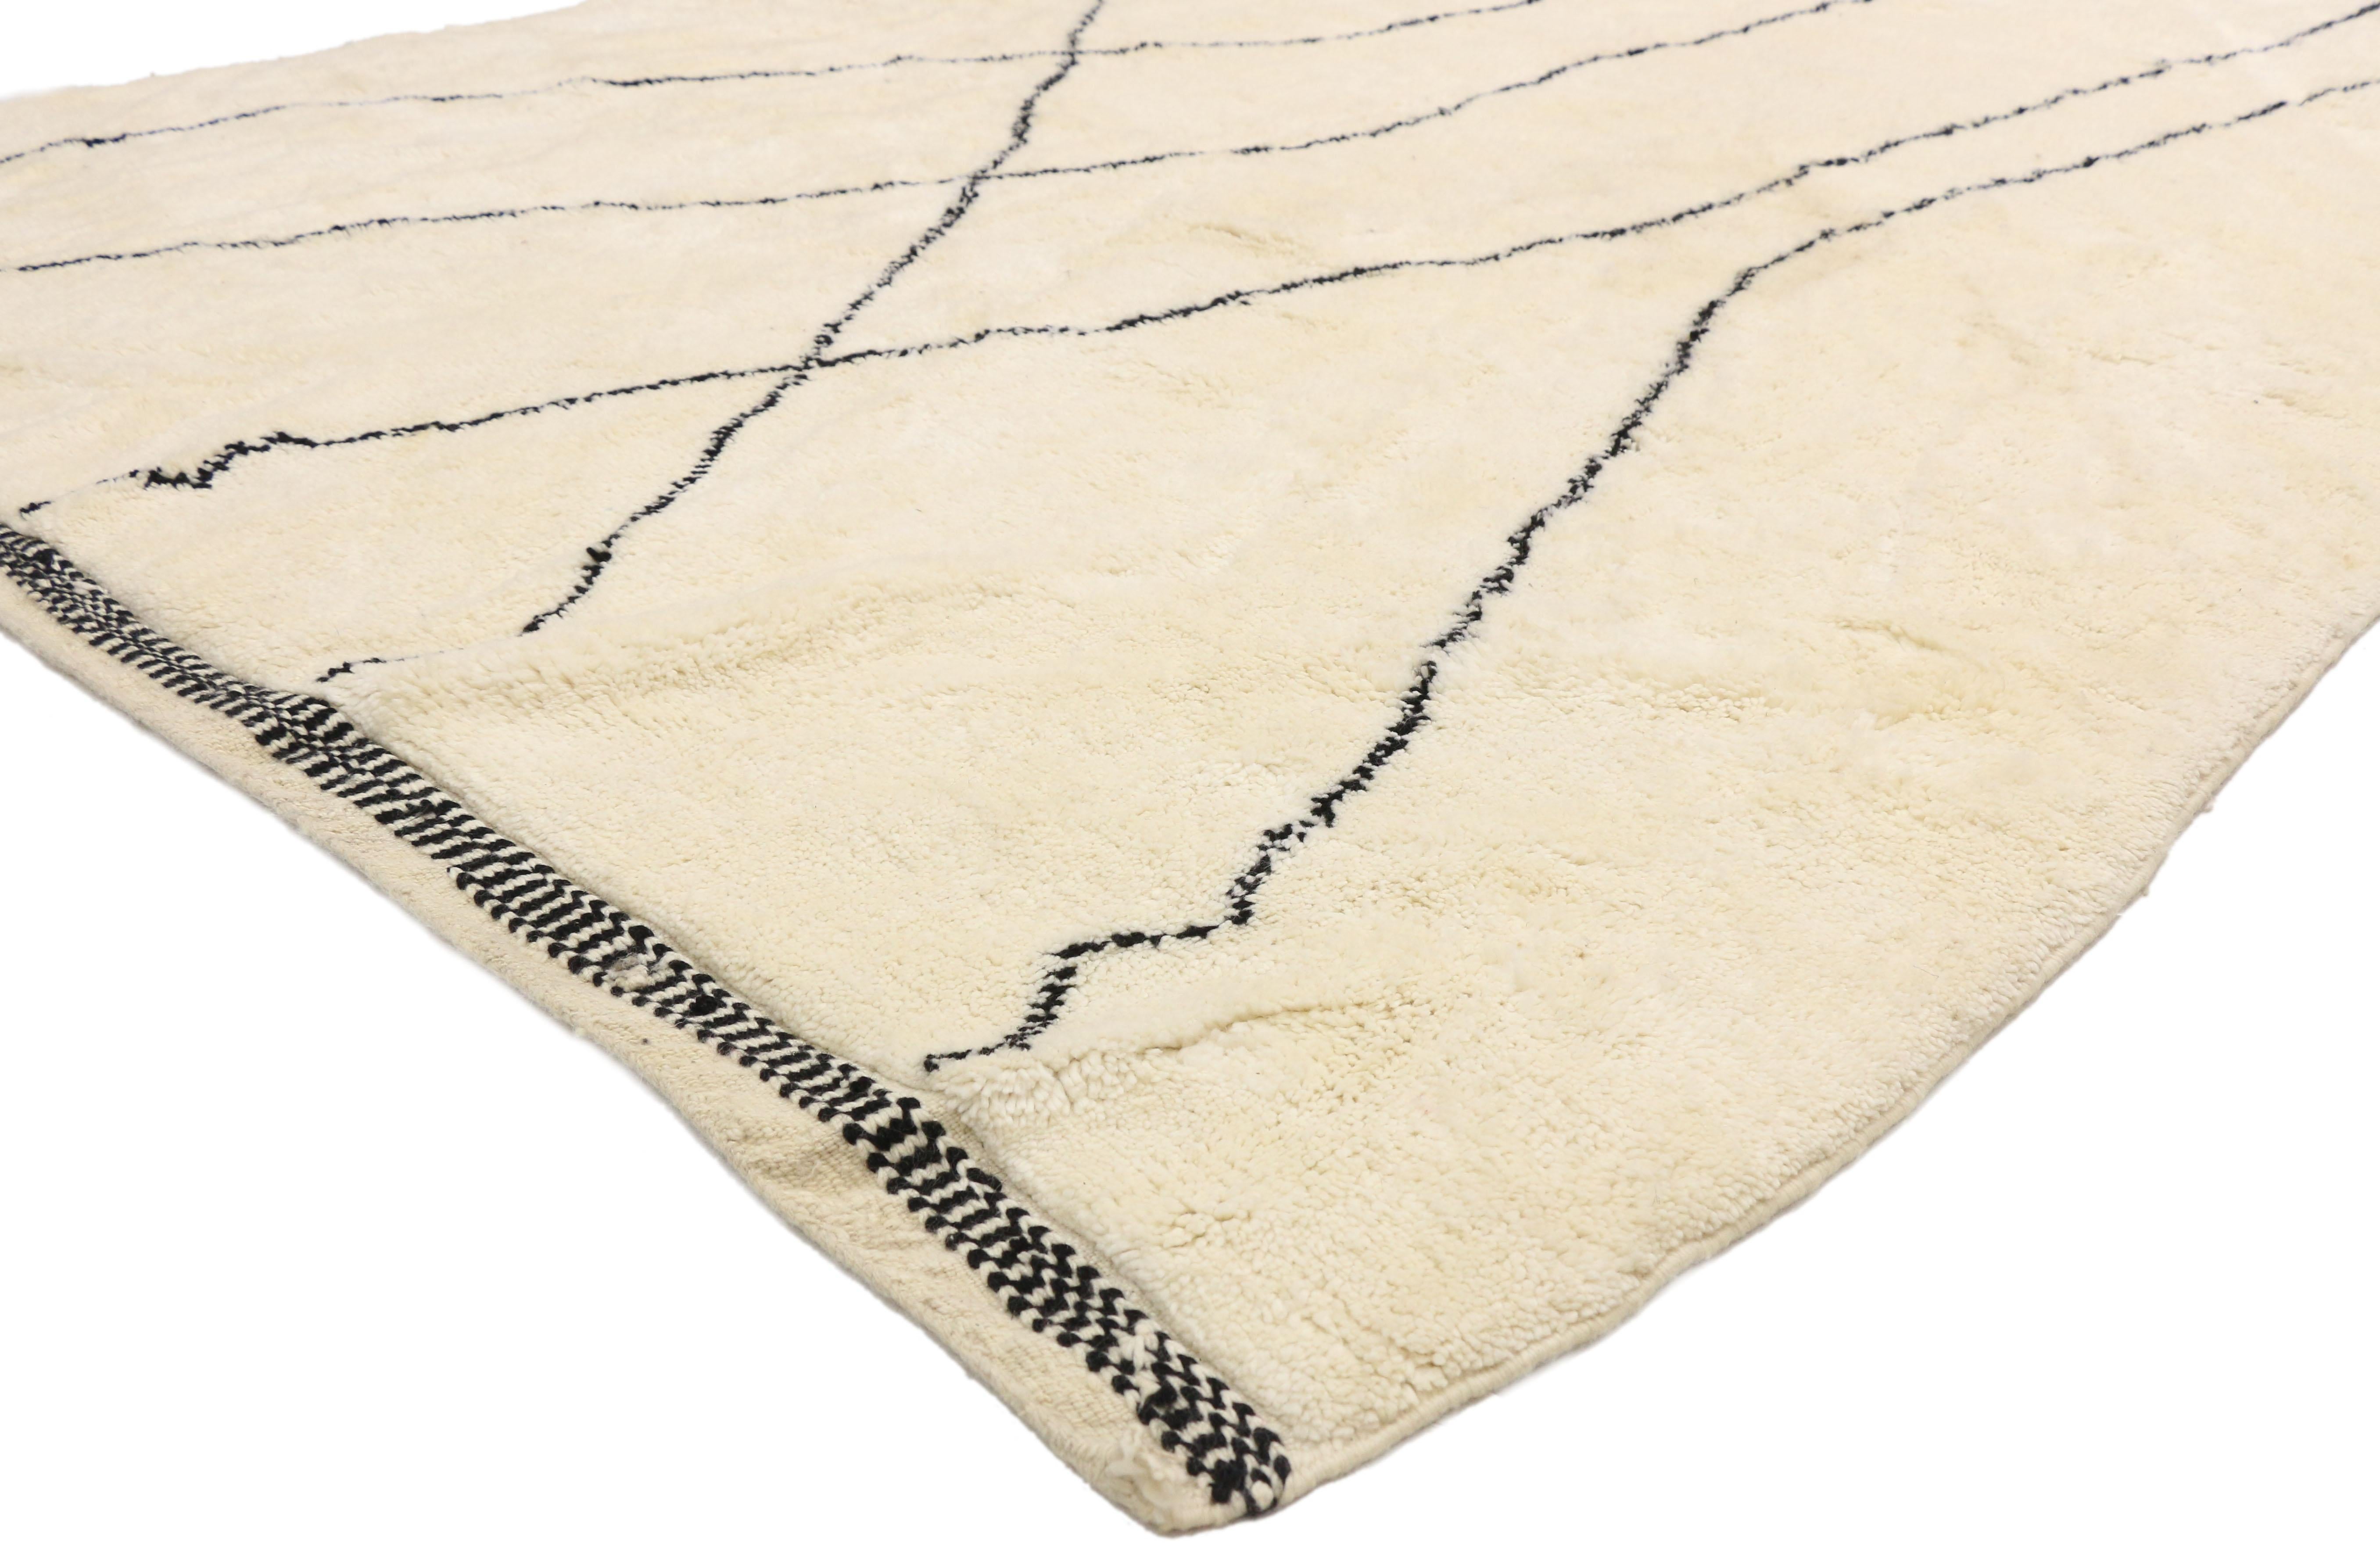 20765, new contemporary Modern Berber Moroccan rug with Minimalist Bauhaus style. Perfectly plush combined with a Minimalist Bauhaus style, this hand knotted wool Berber Moroccan rug provides a feeling of cozy contentment. It features asymmetrical